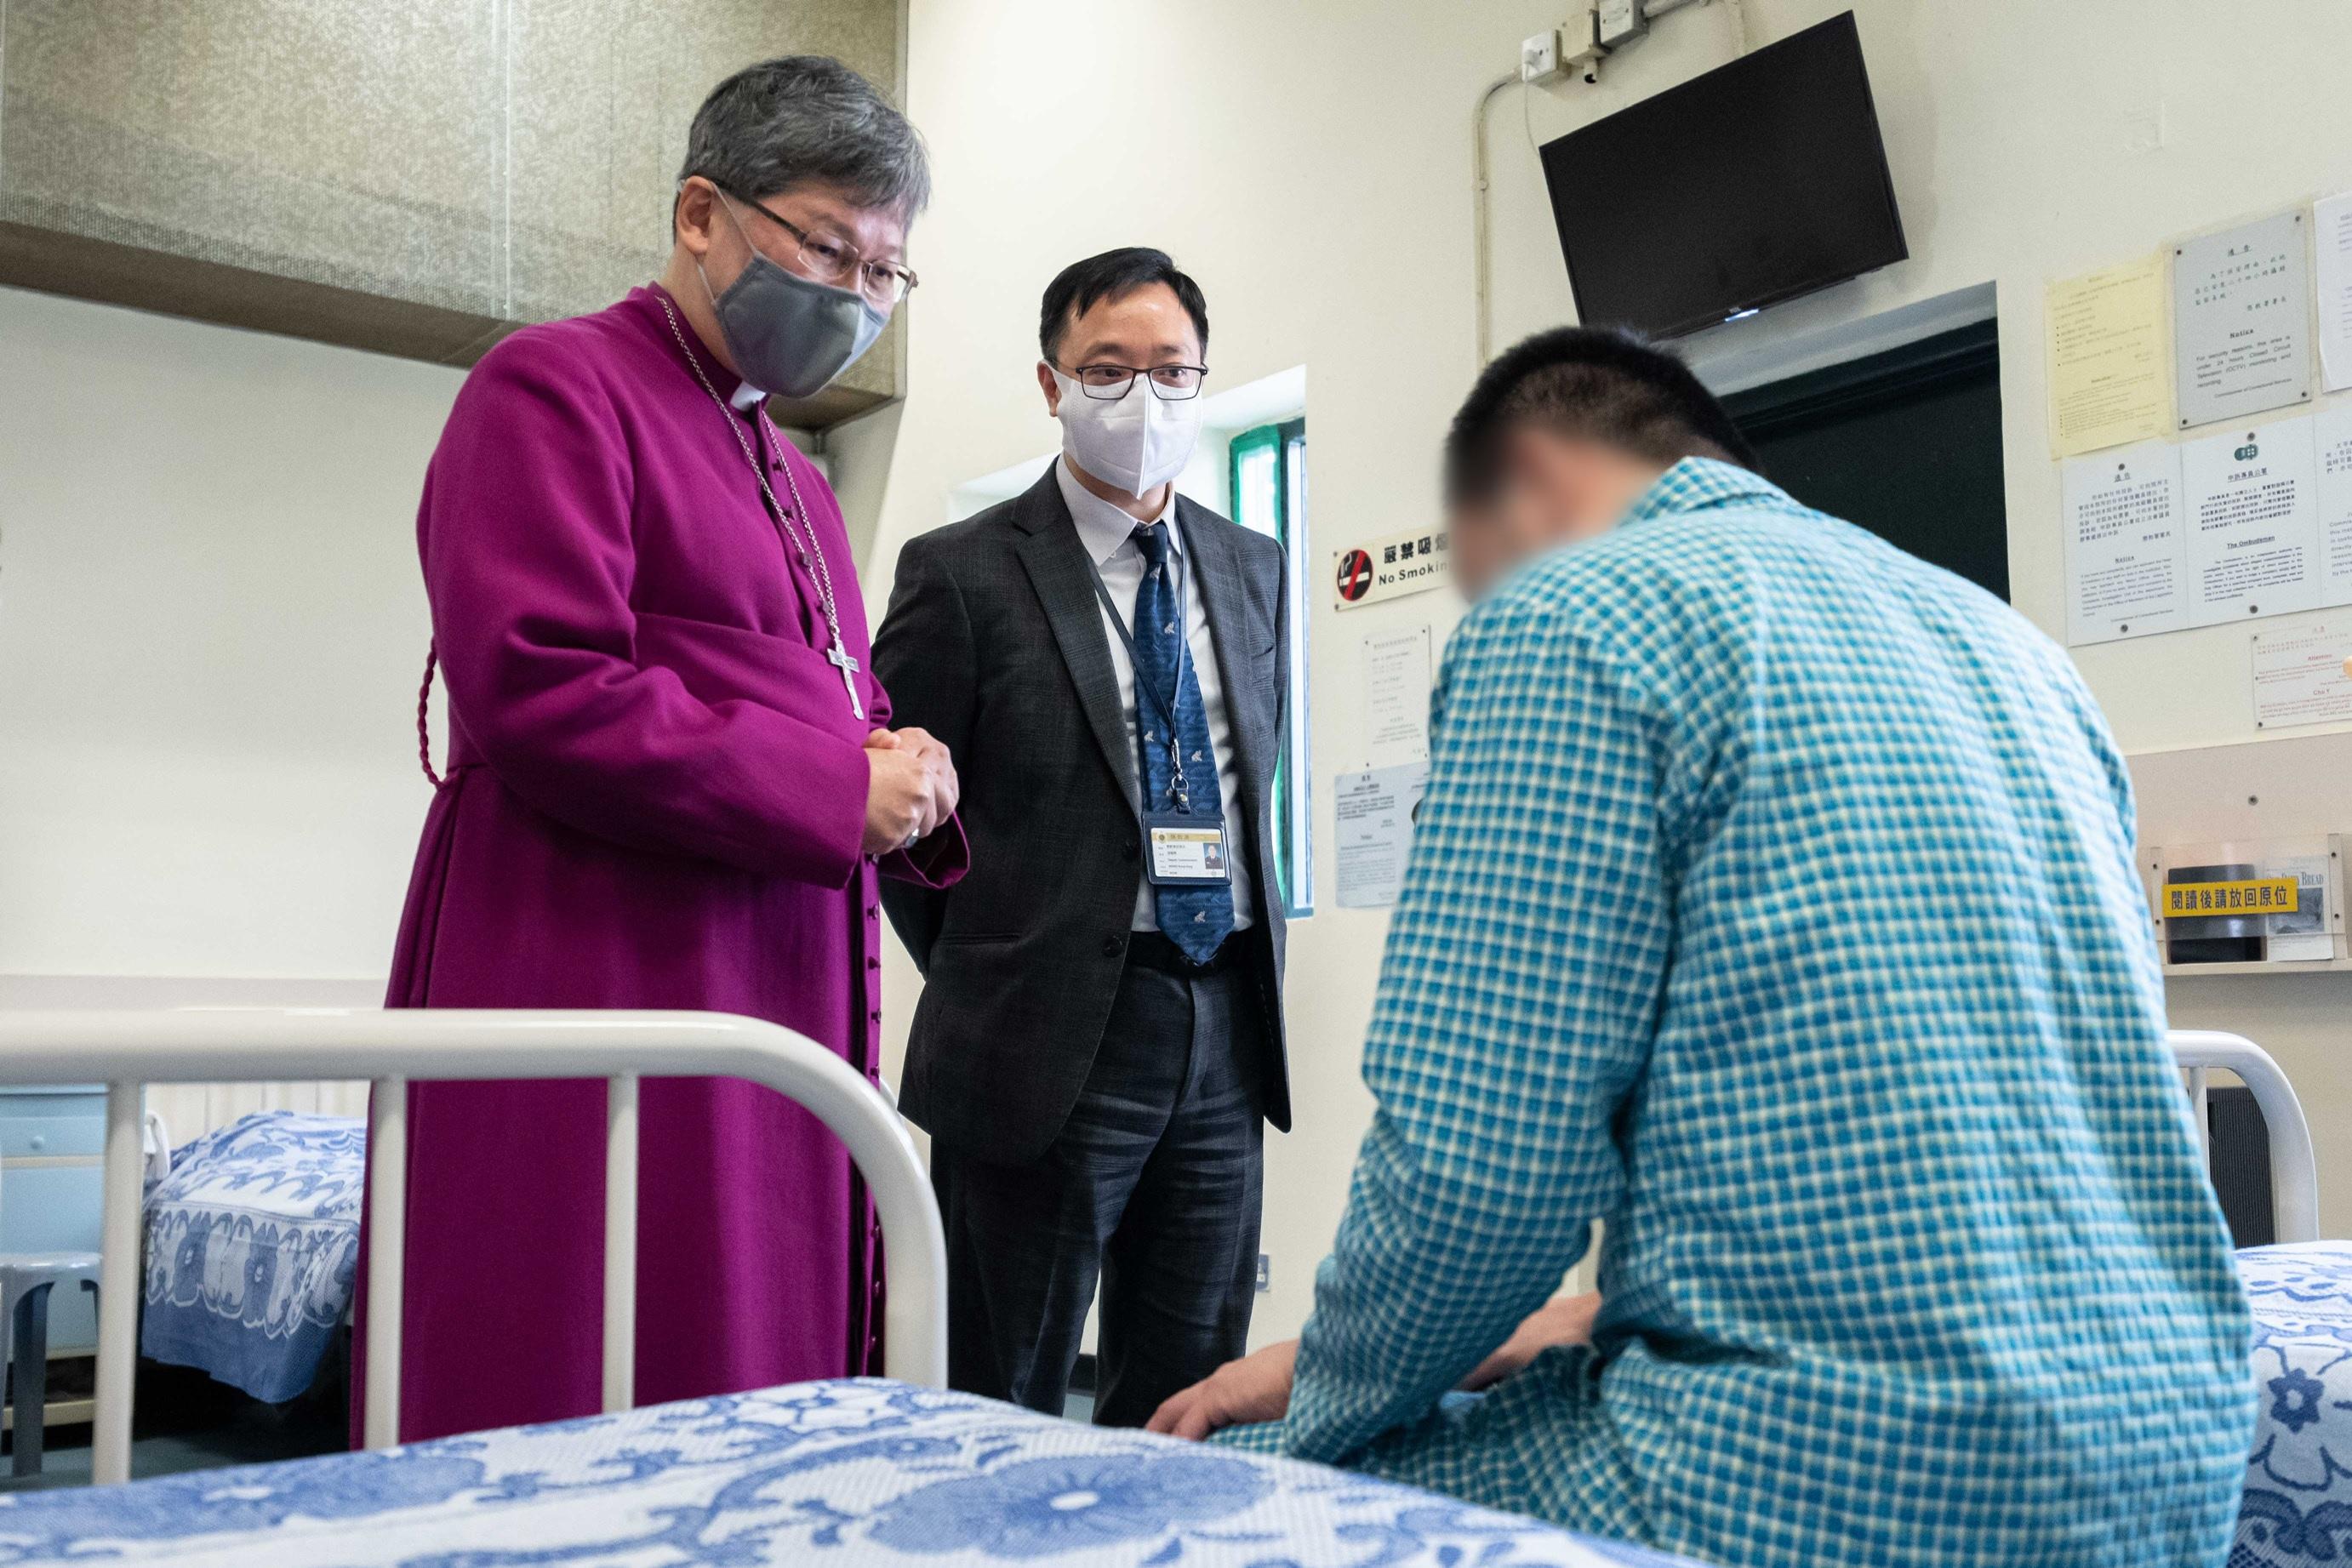 The Correctional Services Department has arranged for persons in custody to attend activities during the Christmas festive period. The Archbishop of Hong Kong, the Most Reverend Andrew Chan (left), visited the hospital in Pak Sha Wan Correctional Institution to show his love and care to the patients on December 23. Looking on is the Deputy Commissioner of Correctional Services, Mr Wong Kwok-hing (centre).